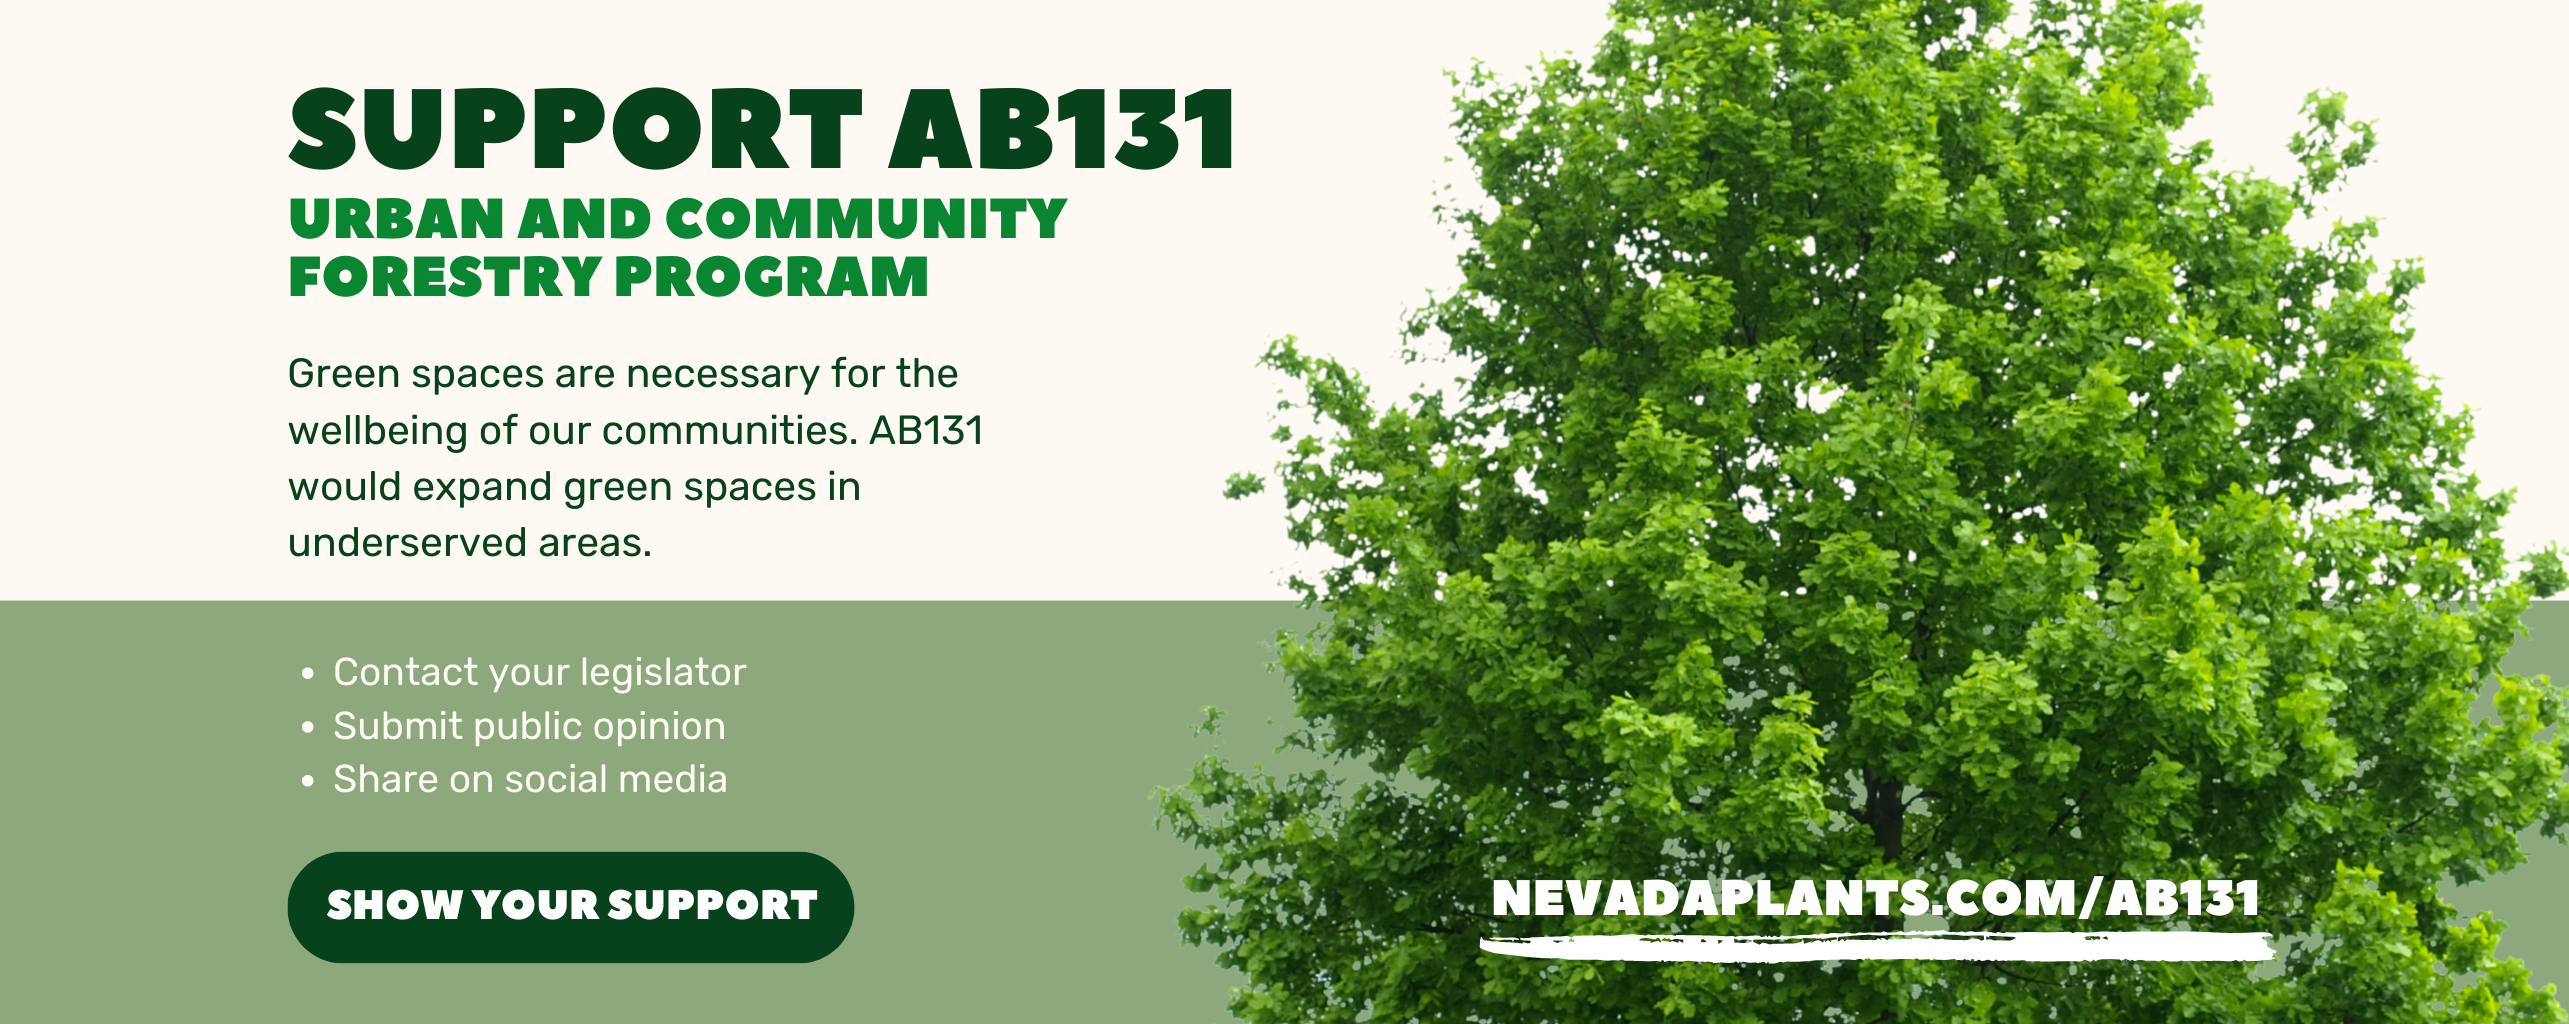 Support AB131 Urban and Community Forestry Program Green spaces are necessary for the wellbeing of our communities. AB131 would expand green spaces in underserved areas. Visit nevadaplants.com/ab131 for information on how to contact your legislator and submit public opinion.